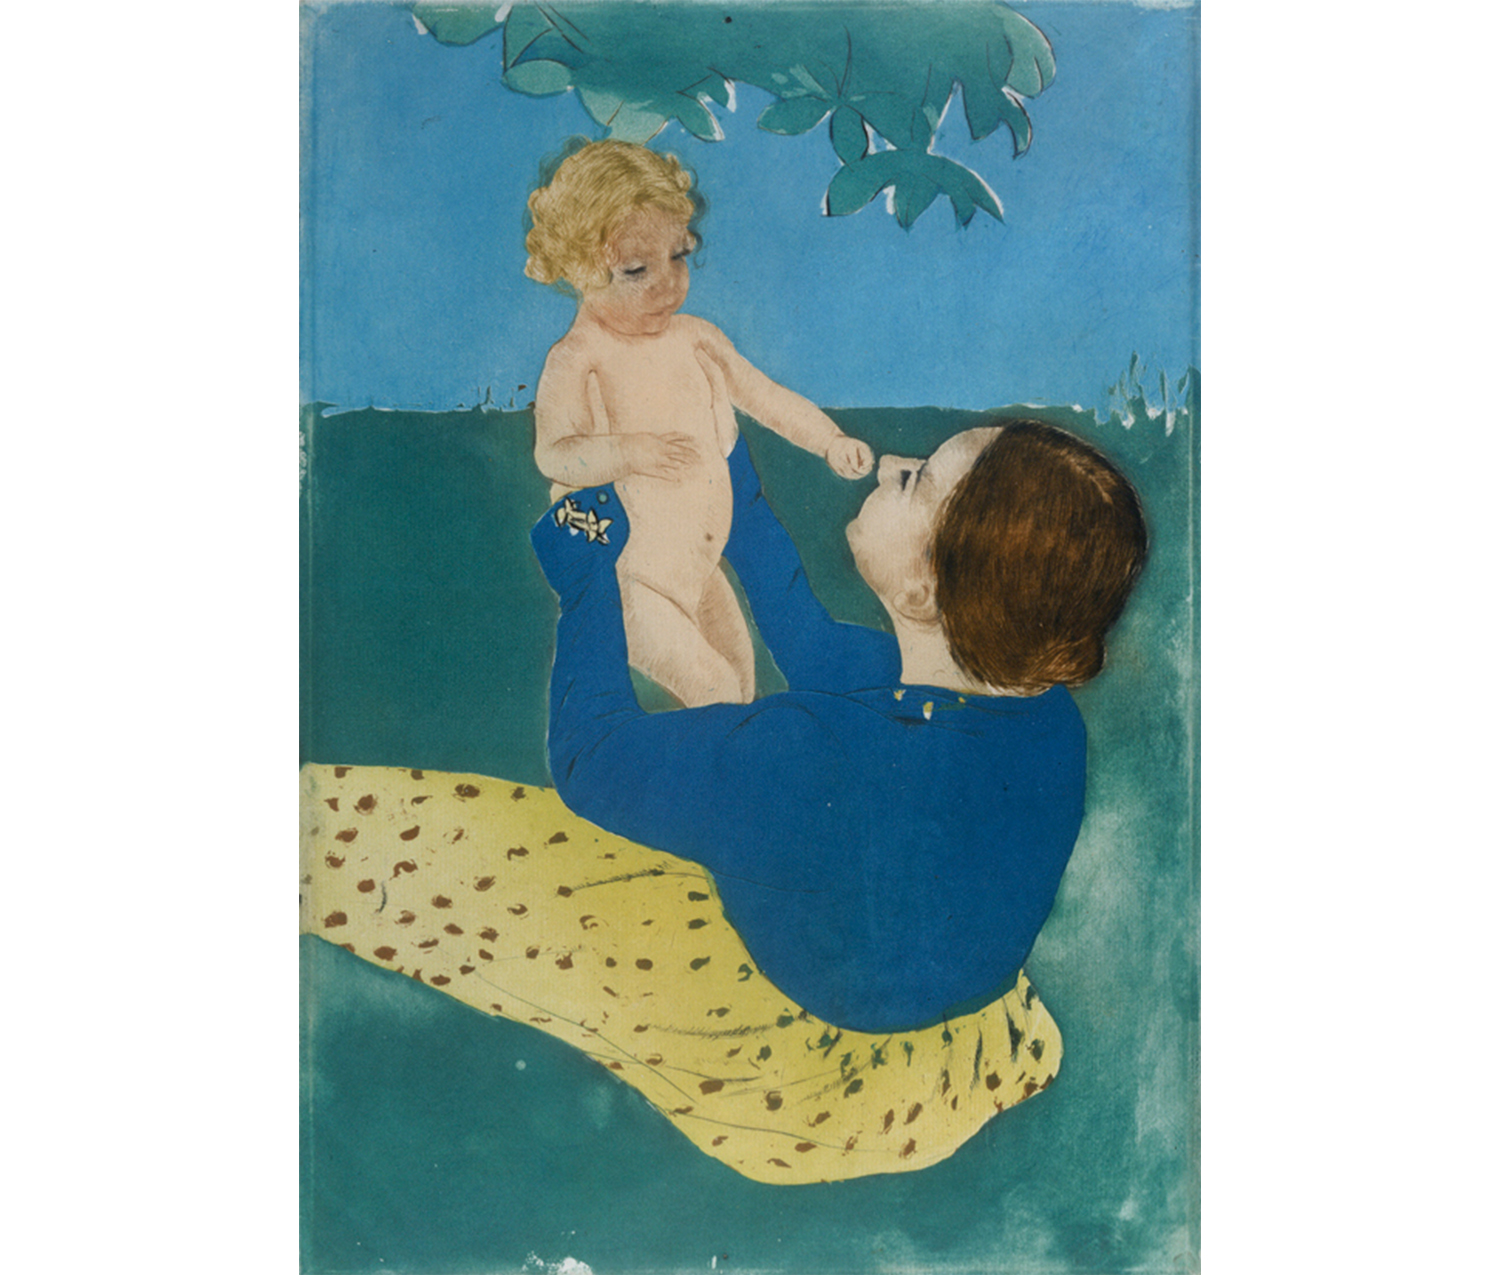 dark haired woman in print skirt and plain blouse holding up a blond naked child, leafy tree branch overhead, plain ground and sky